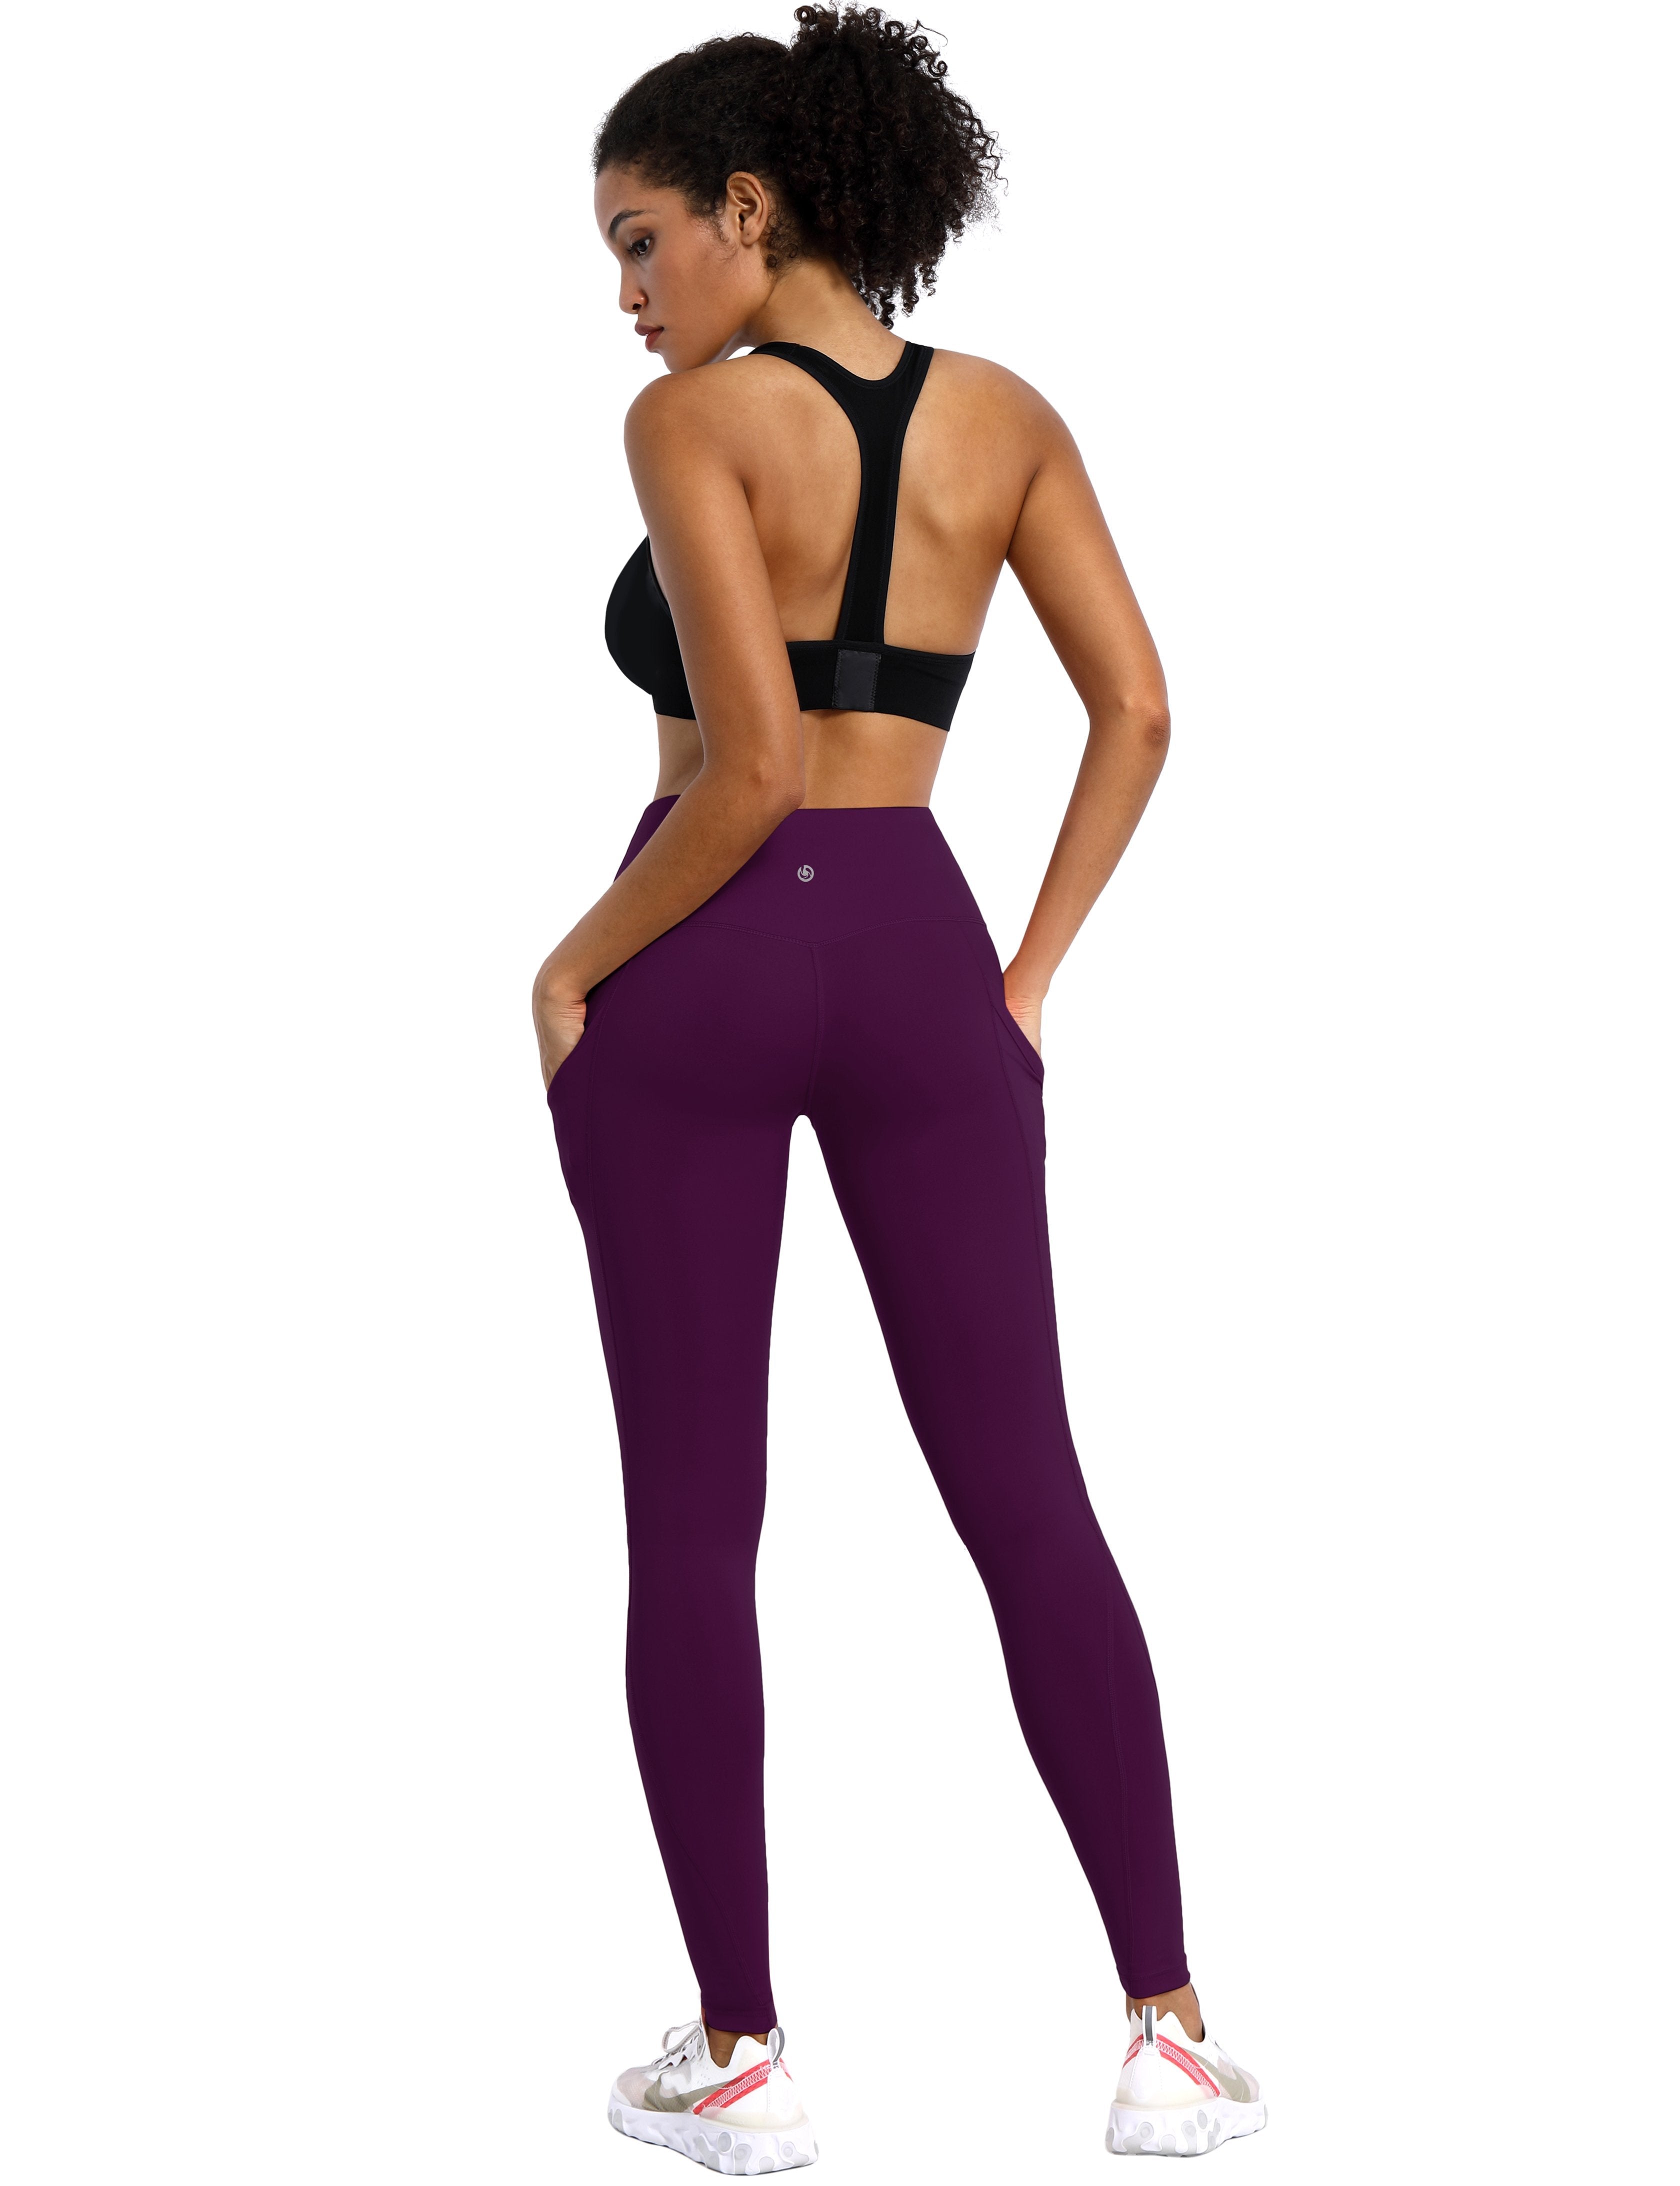 High Waist Side Pockets Running Pants plum 75% Nylon, 25% Spandex Fabric doesn't attract lint easily 4-way stretch No see-through Moisture-wicking Tummy control Inner pocket